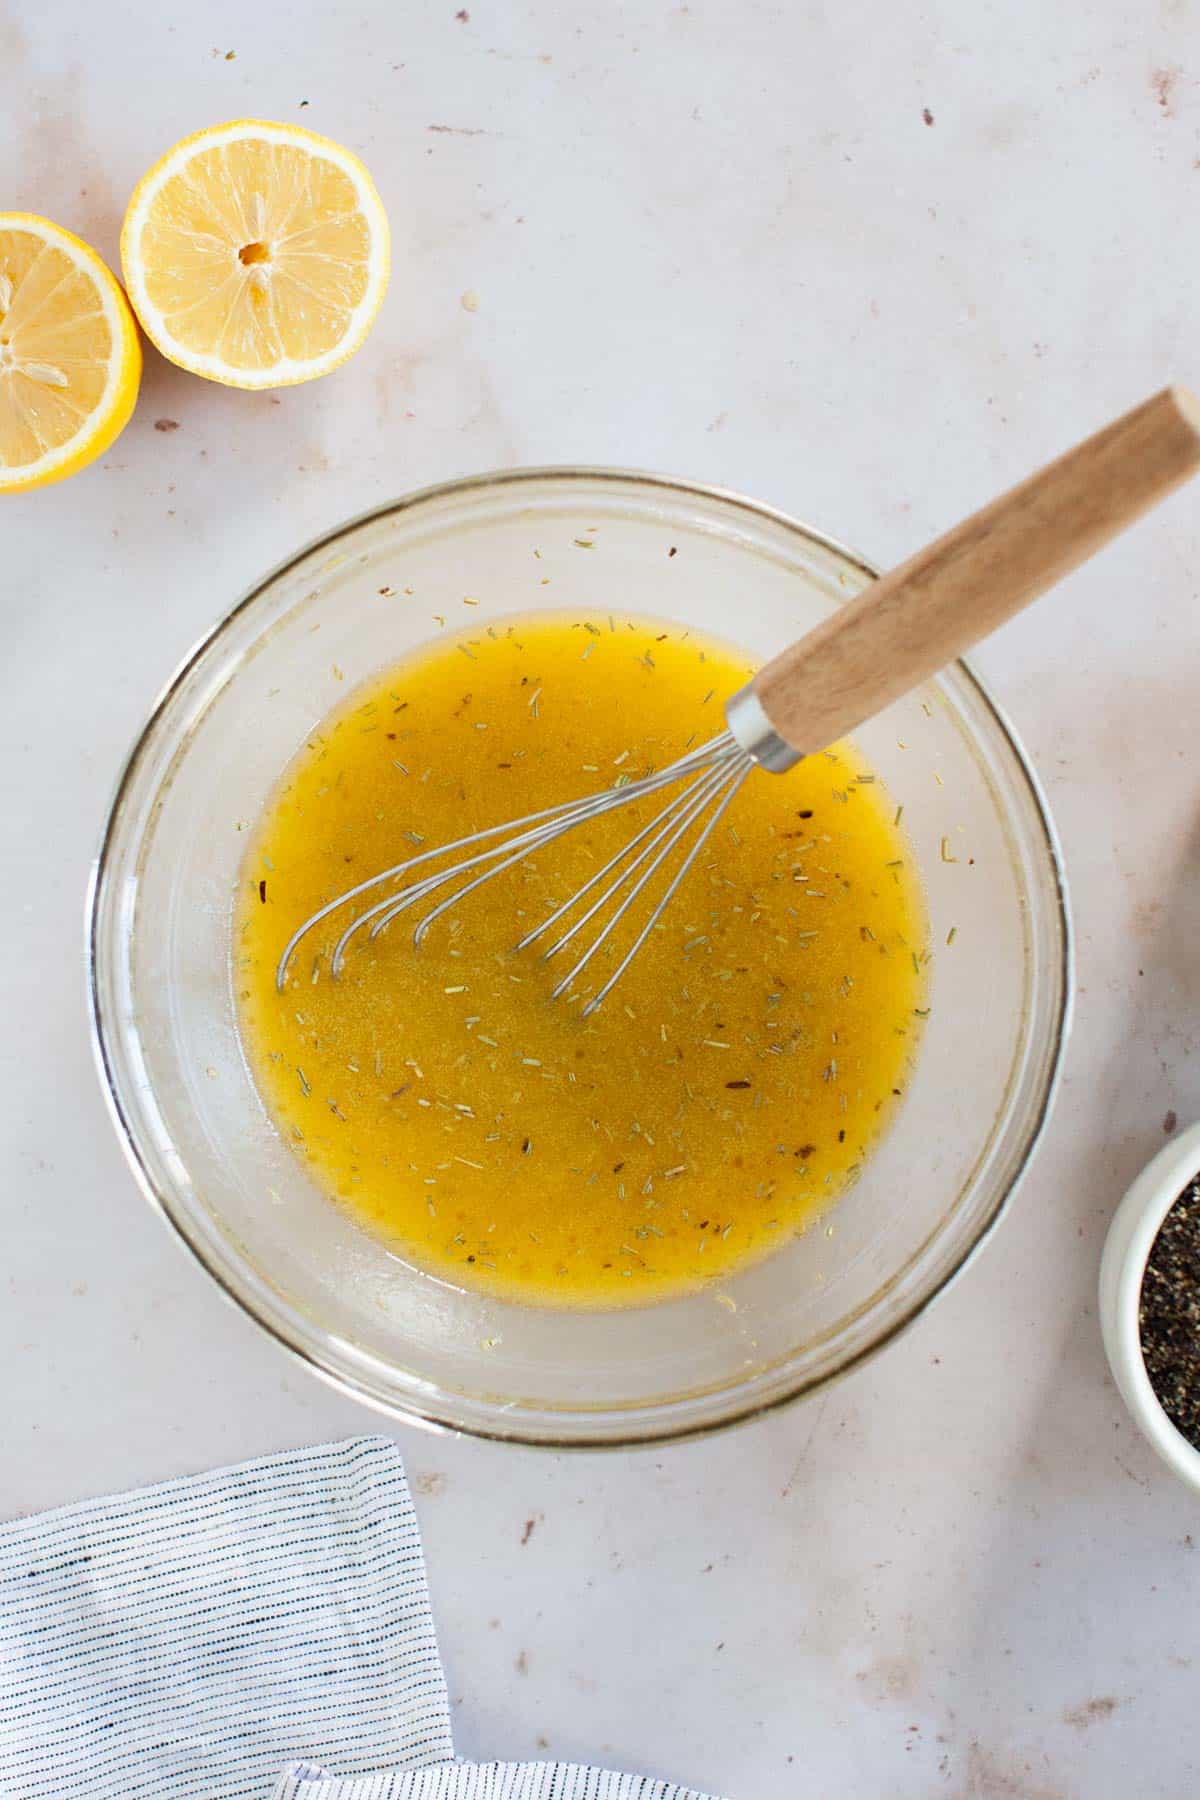 Dijon mustard, spices, honey, vinegar and lemon juice whisked together with a wooden handled flat whisk.